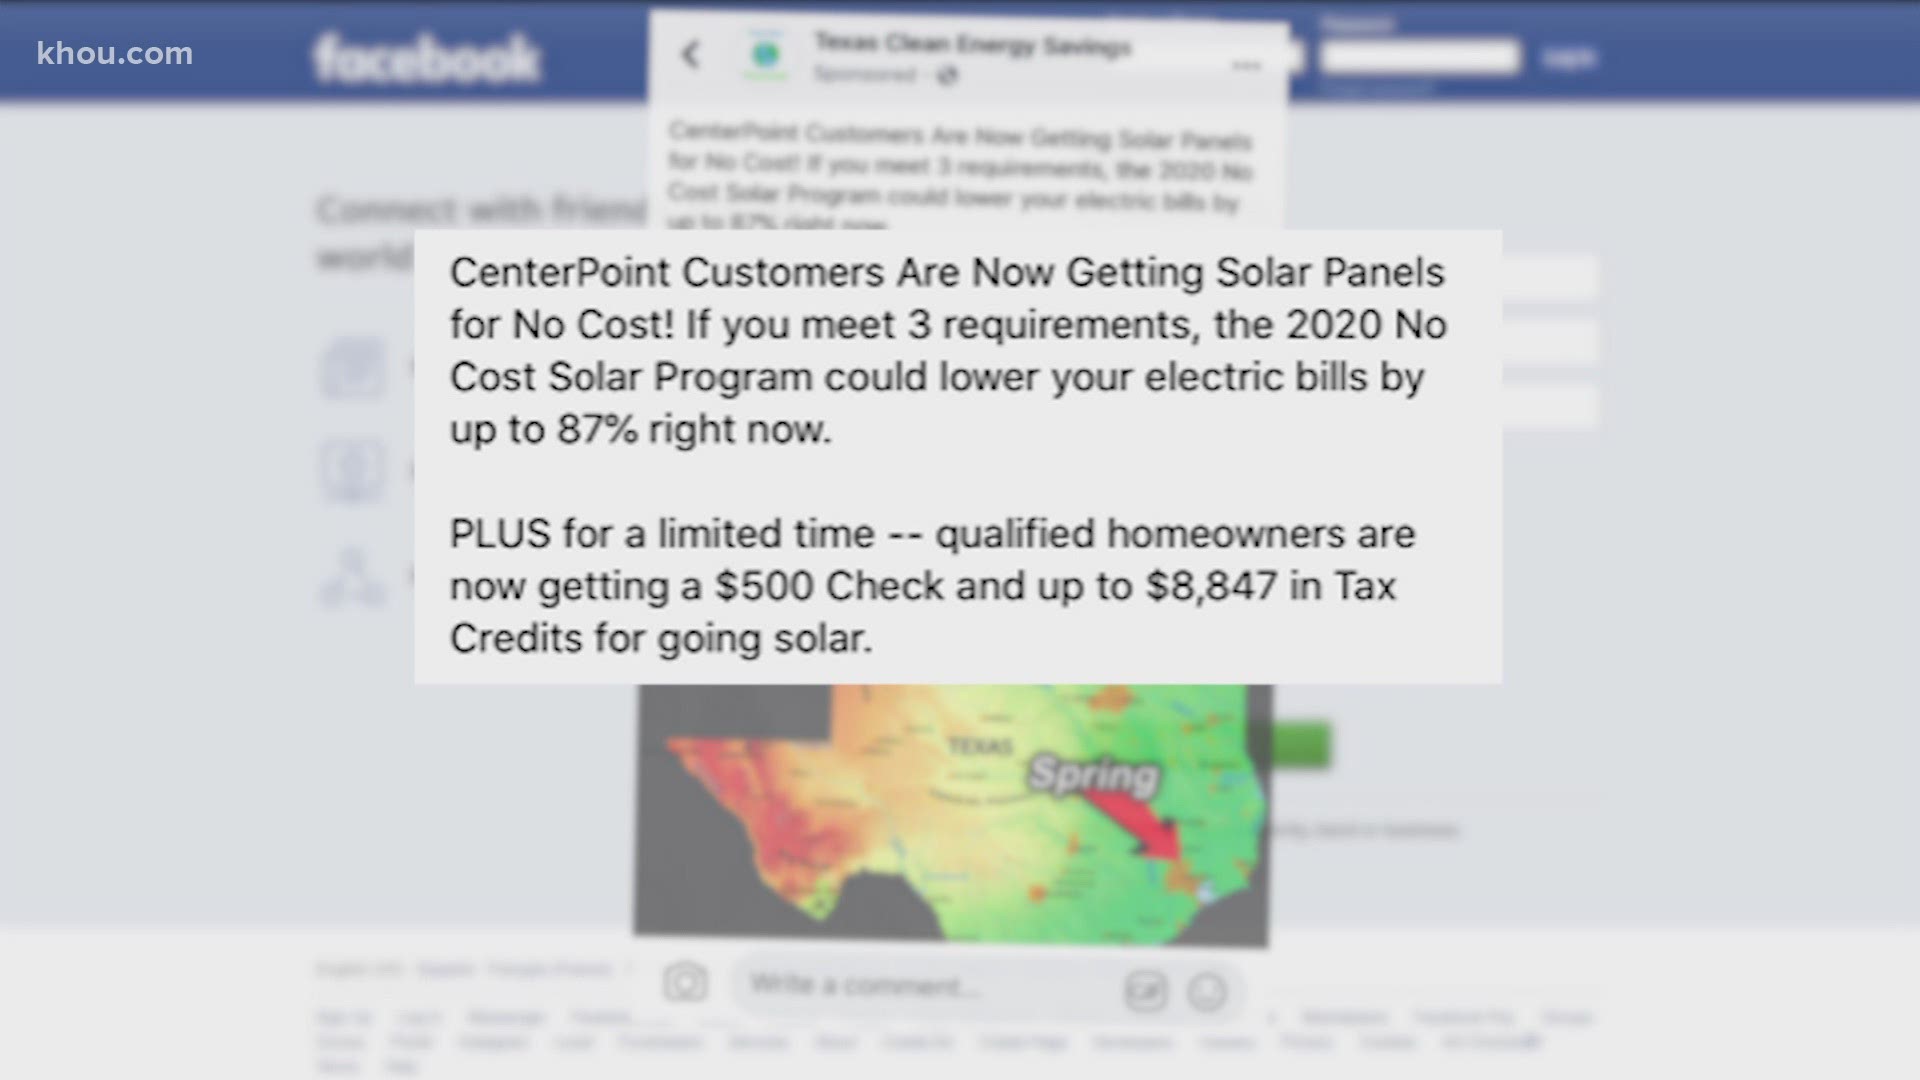 The post appears to be sponsored by Texas Clean Energy Systems and targets CenterPoint Energy customers.